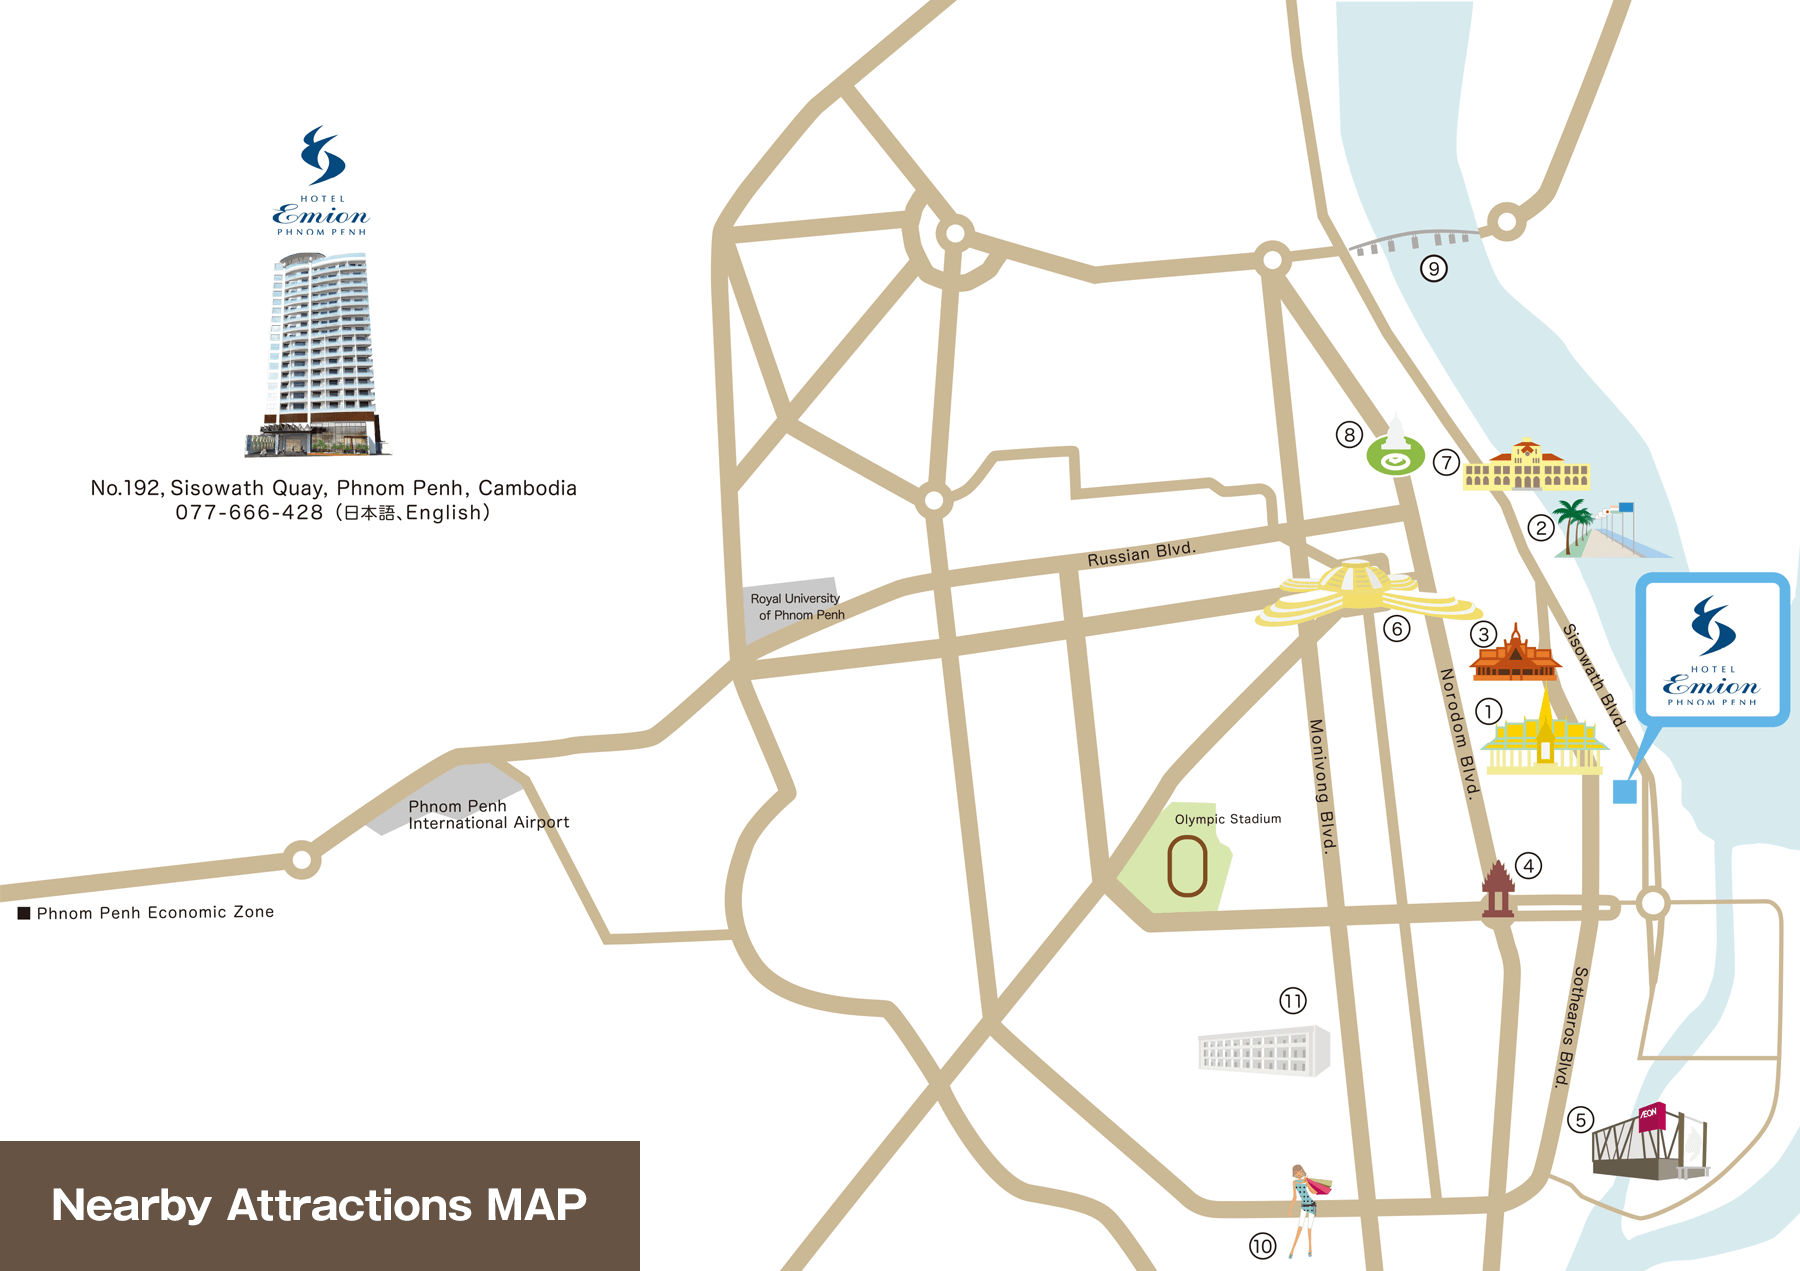 Nearby Attractions map